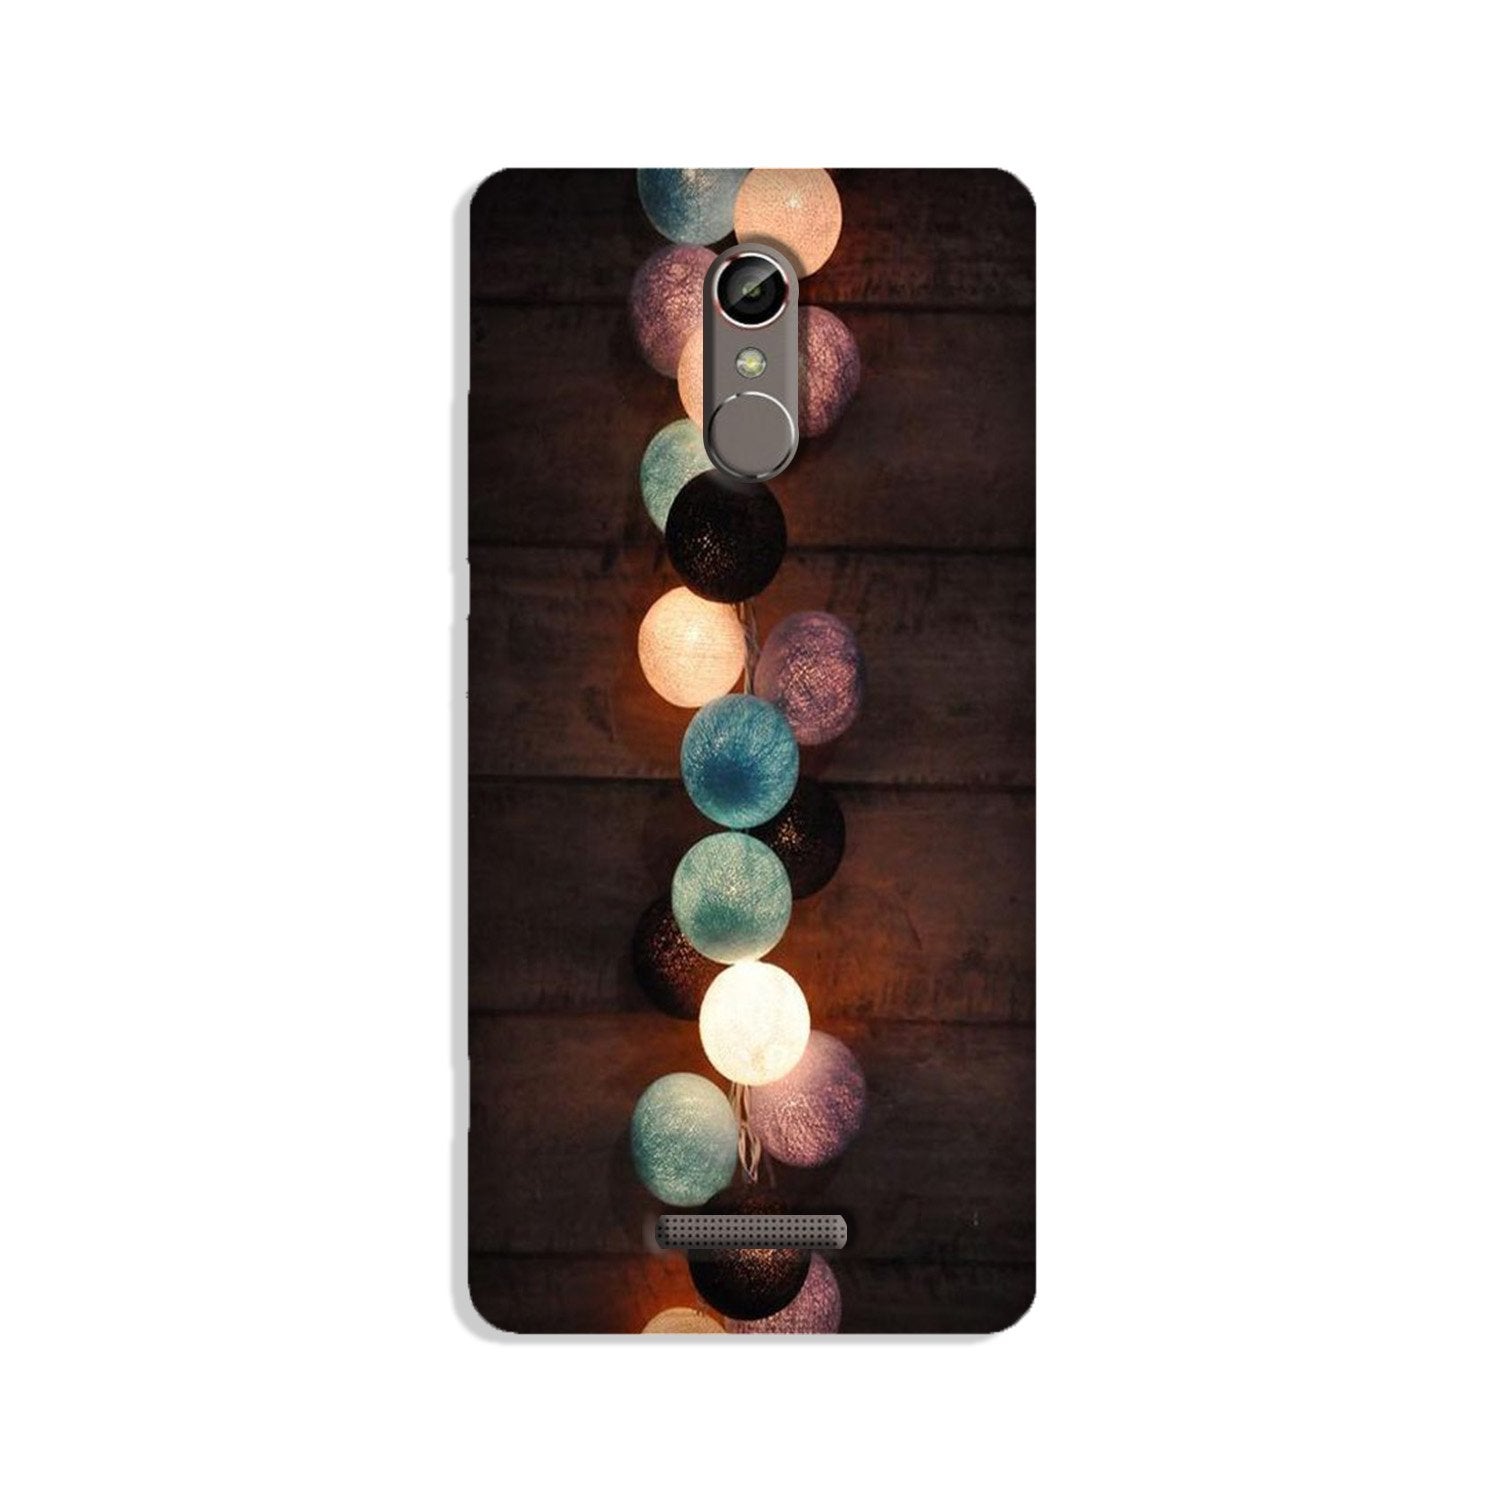 Party Lights Case for Gionee S6s (Design No. 209)